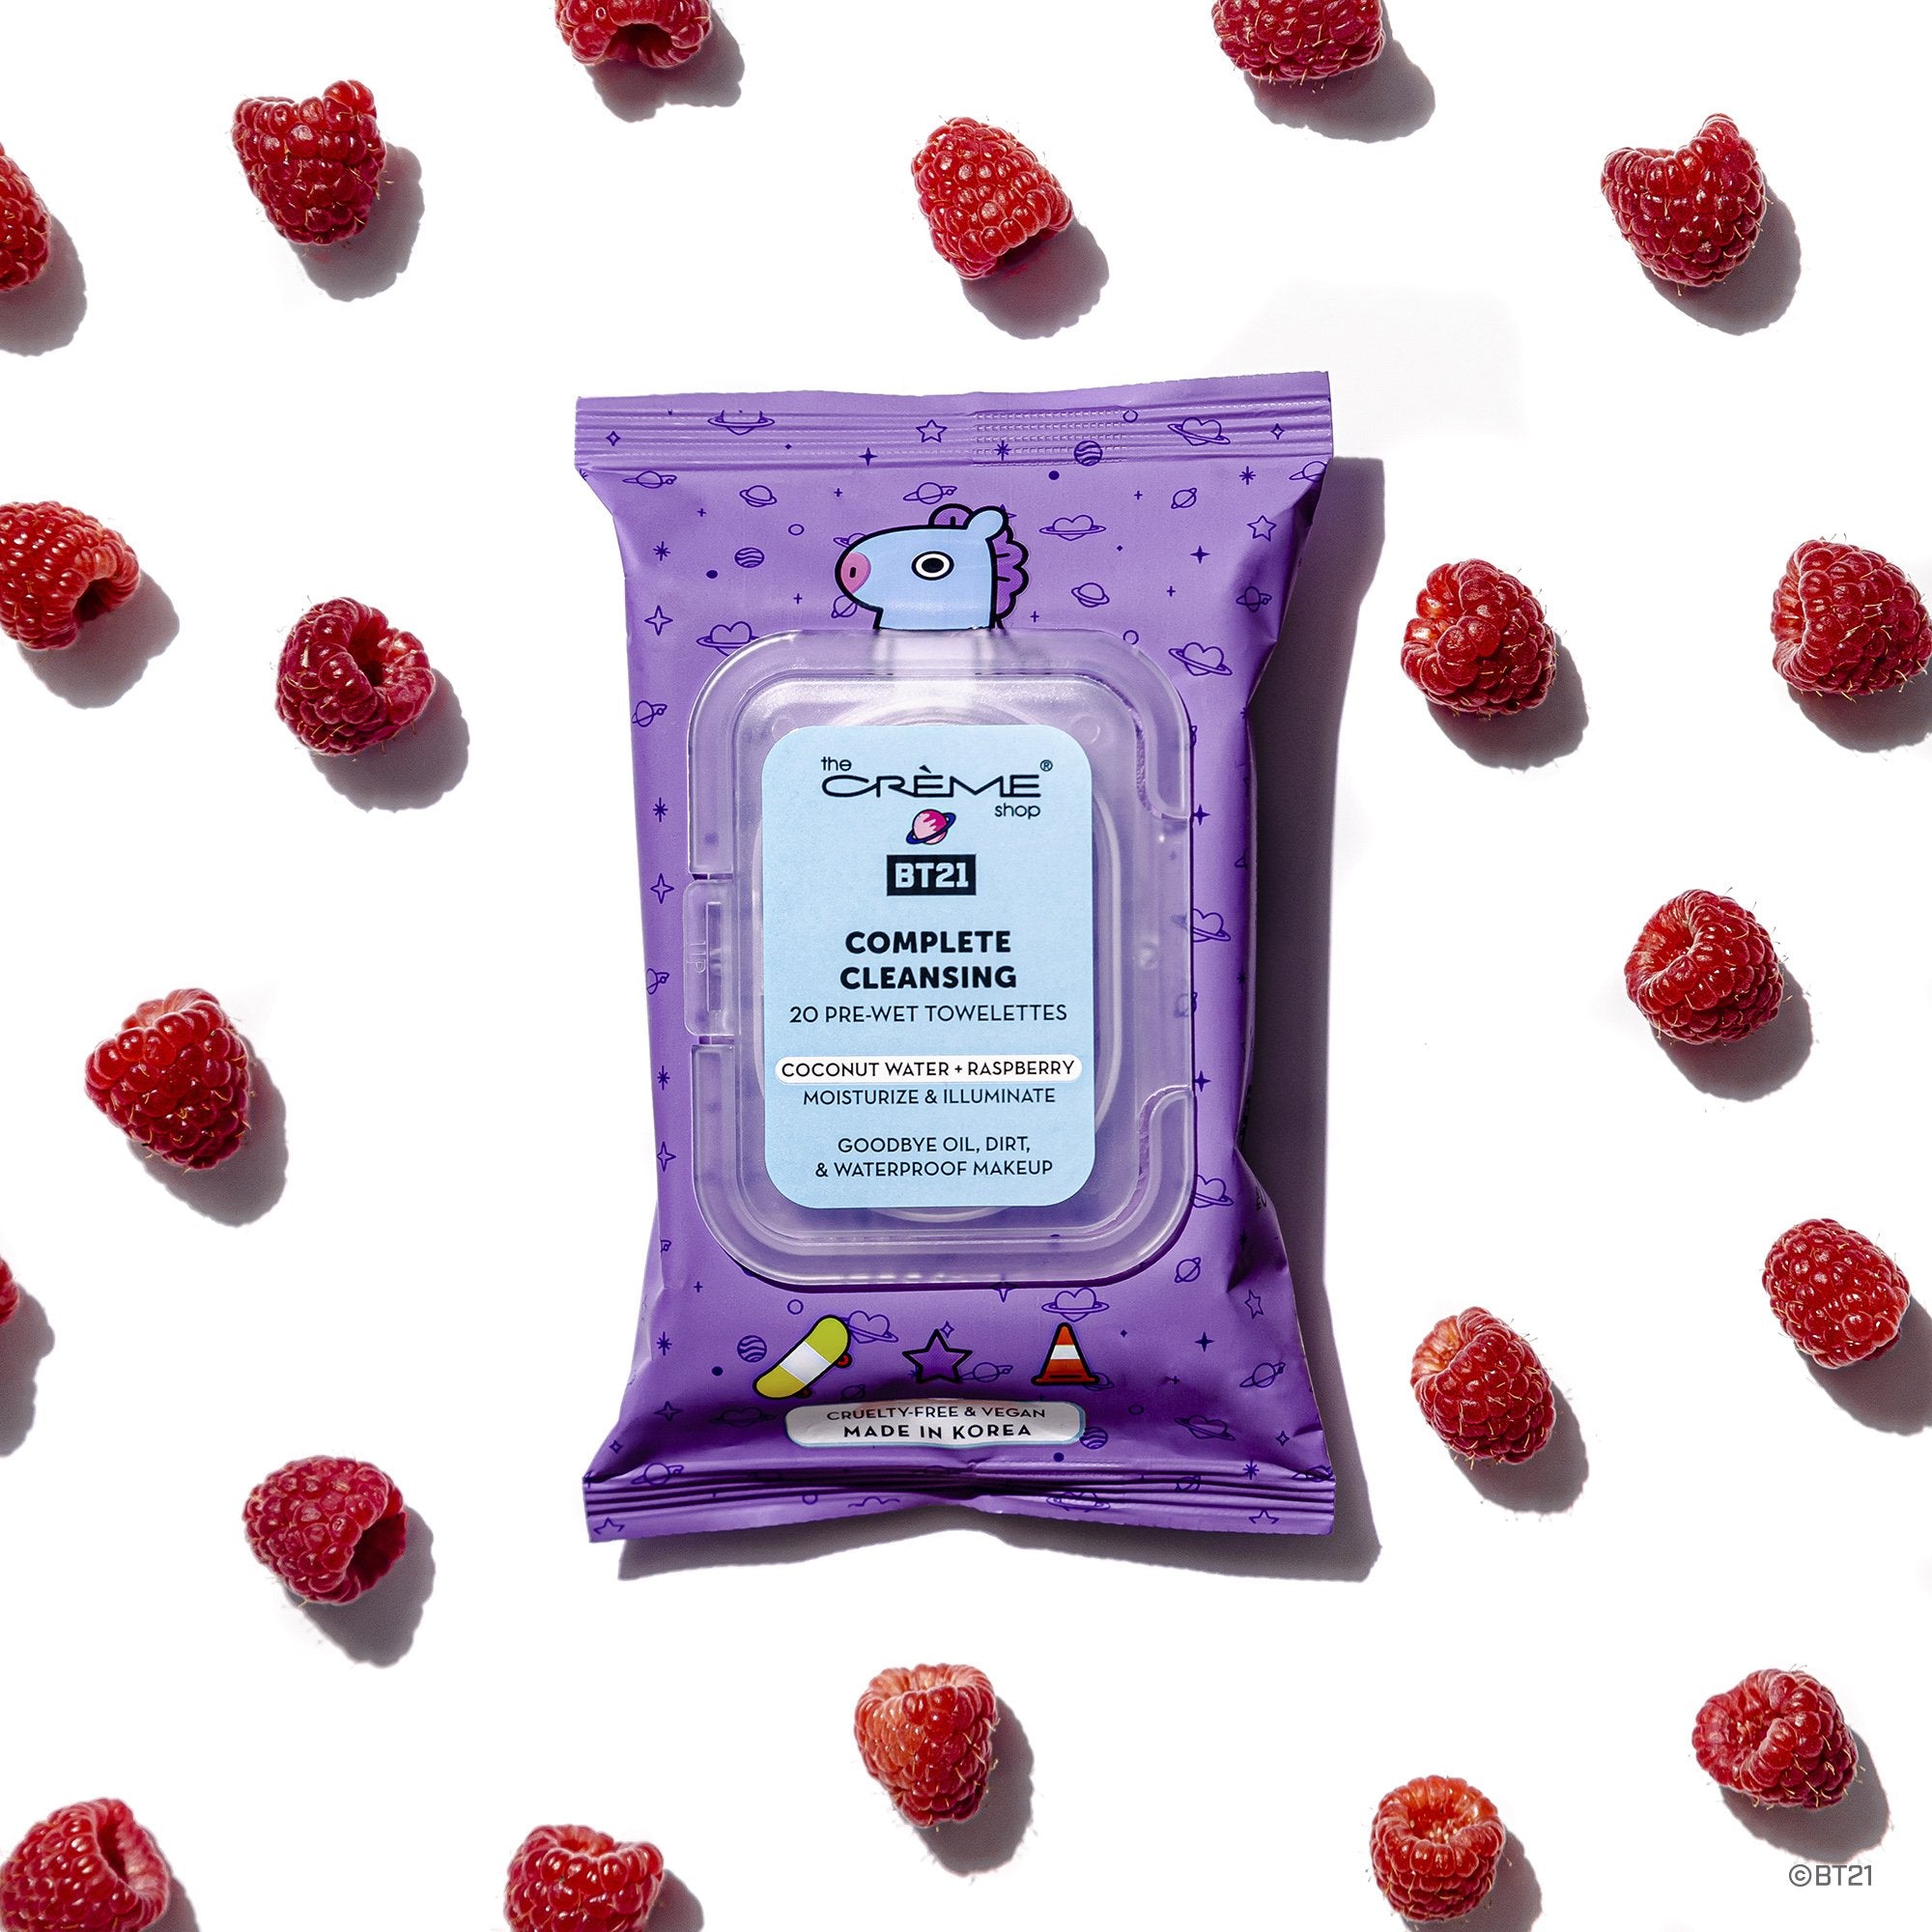 MANG Complete Cleansing Towelettes - Coconut Water & Raspberry (20 Pre-Wet Towelettes) Towelettes The Crème Shop x BT21 